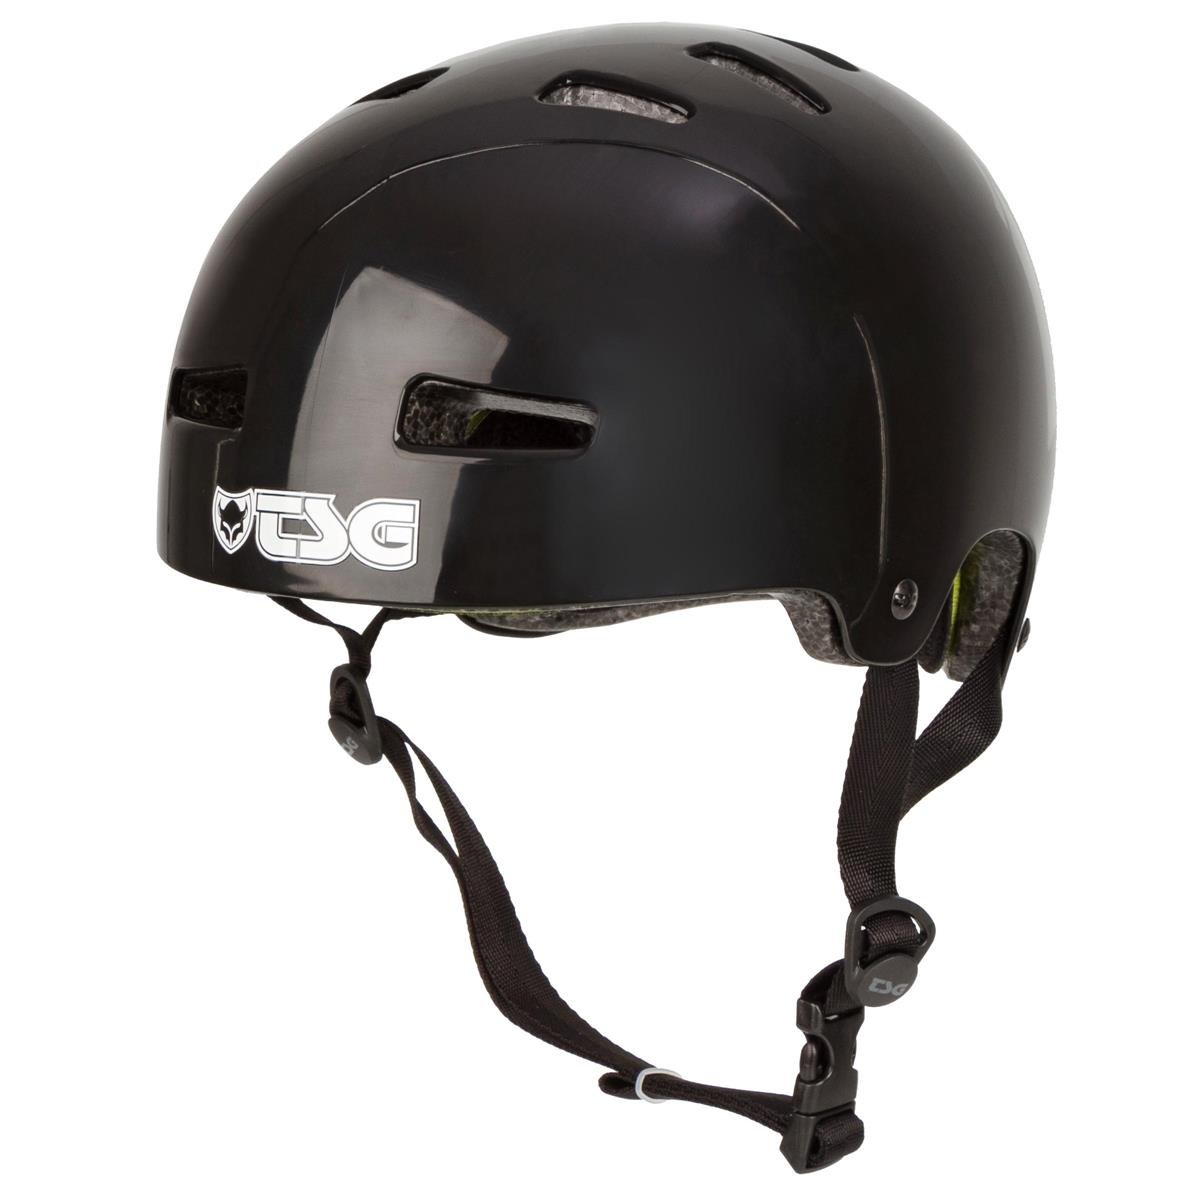 TSG Casque BMX/Dirt Evolution Injected Color - Injected Black